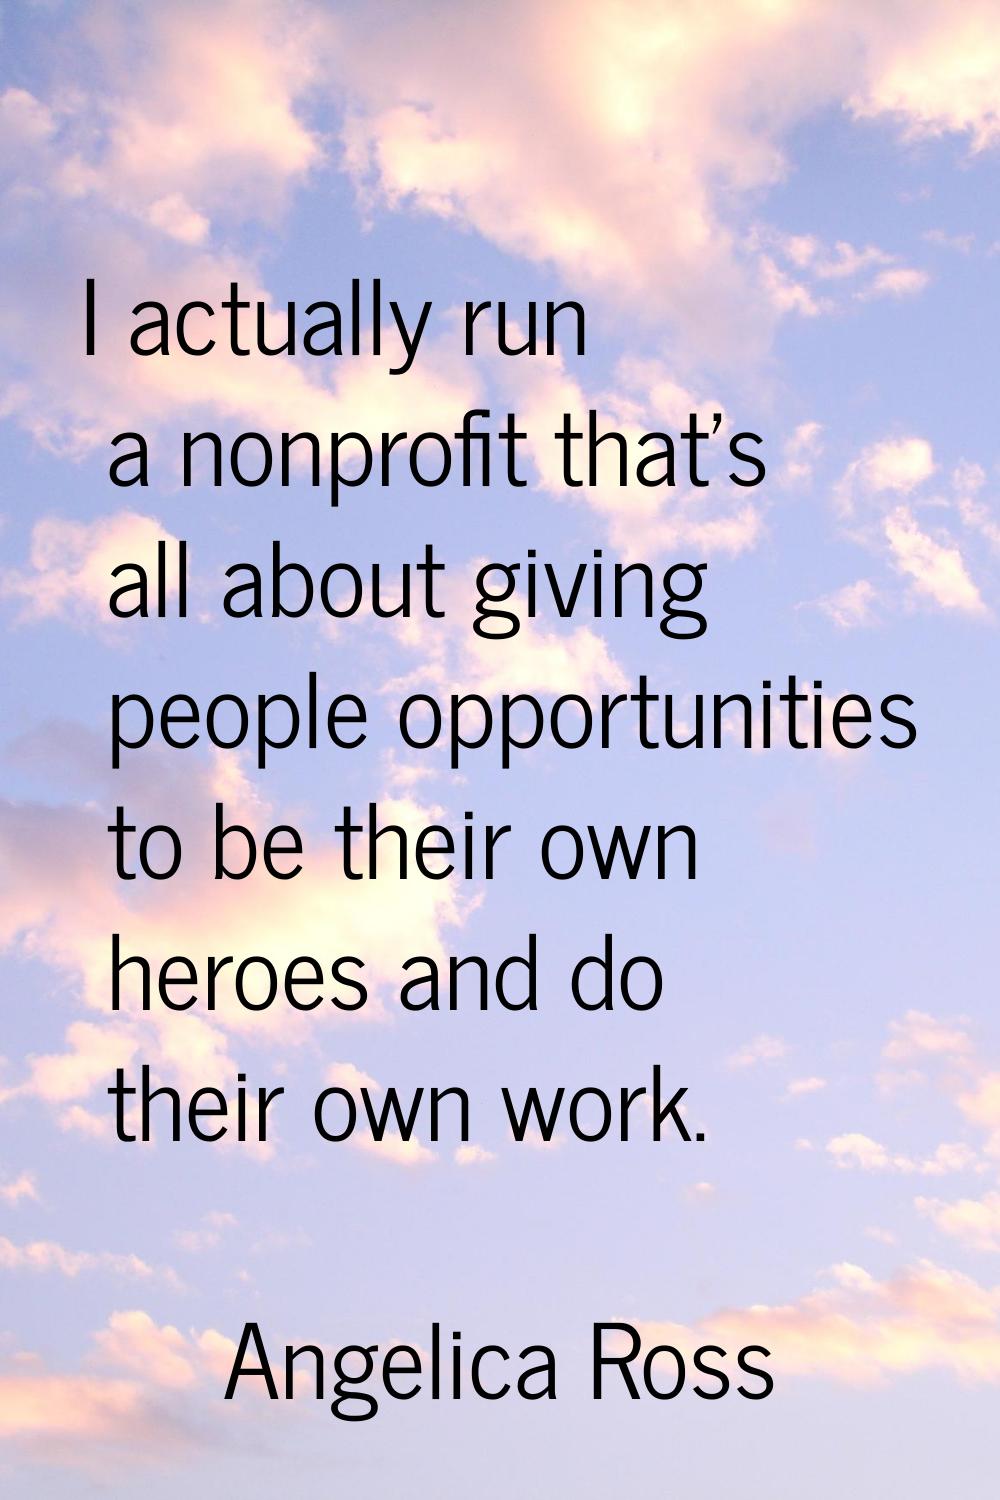 I actually run a nonprofit that's all about giving people opportunities to be their own heroes and 